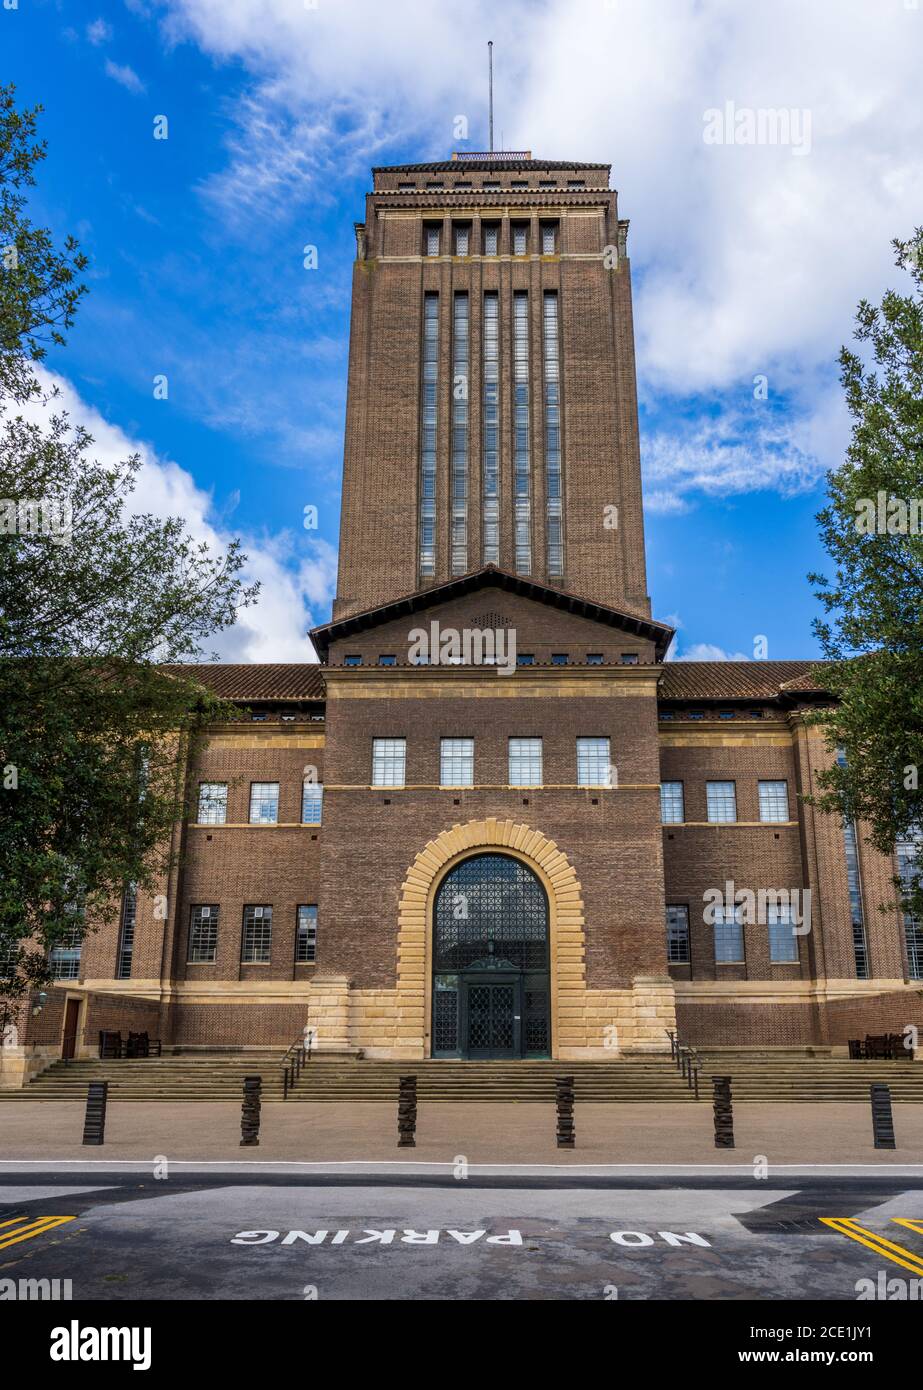 Cambridge University Central Library. The Cambridge University Library building, designed by Sir Giles Gilbert Scott, and opened in 1934 Stock Photo